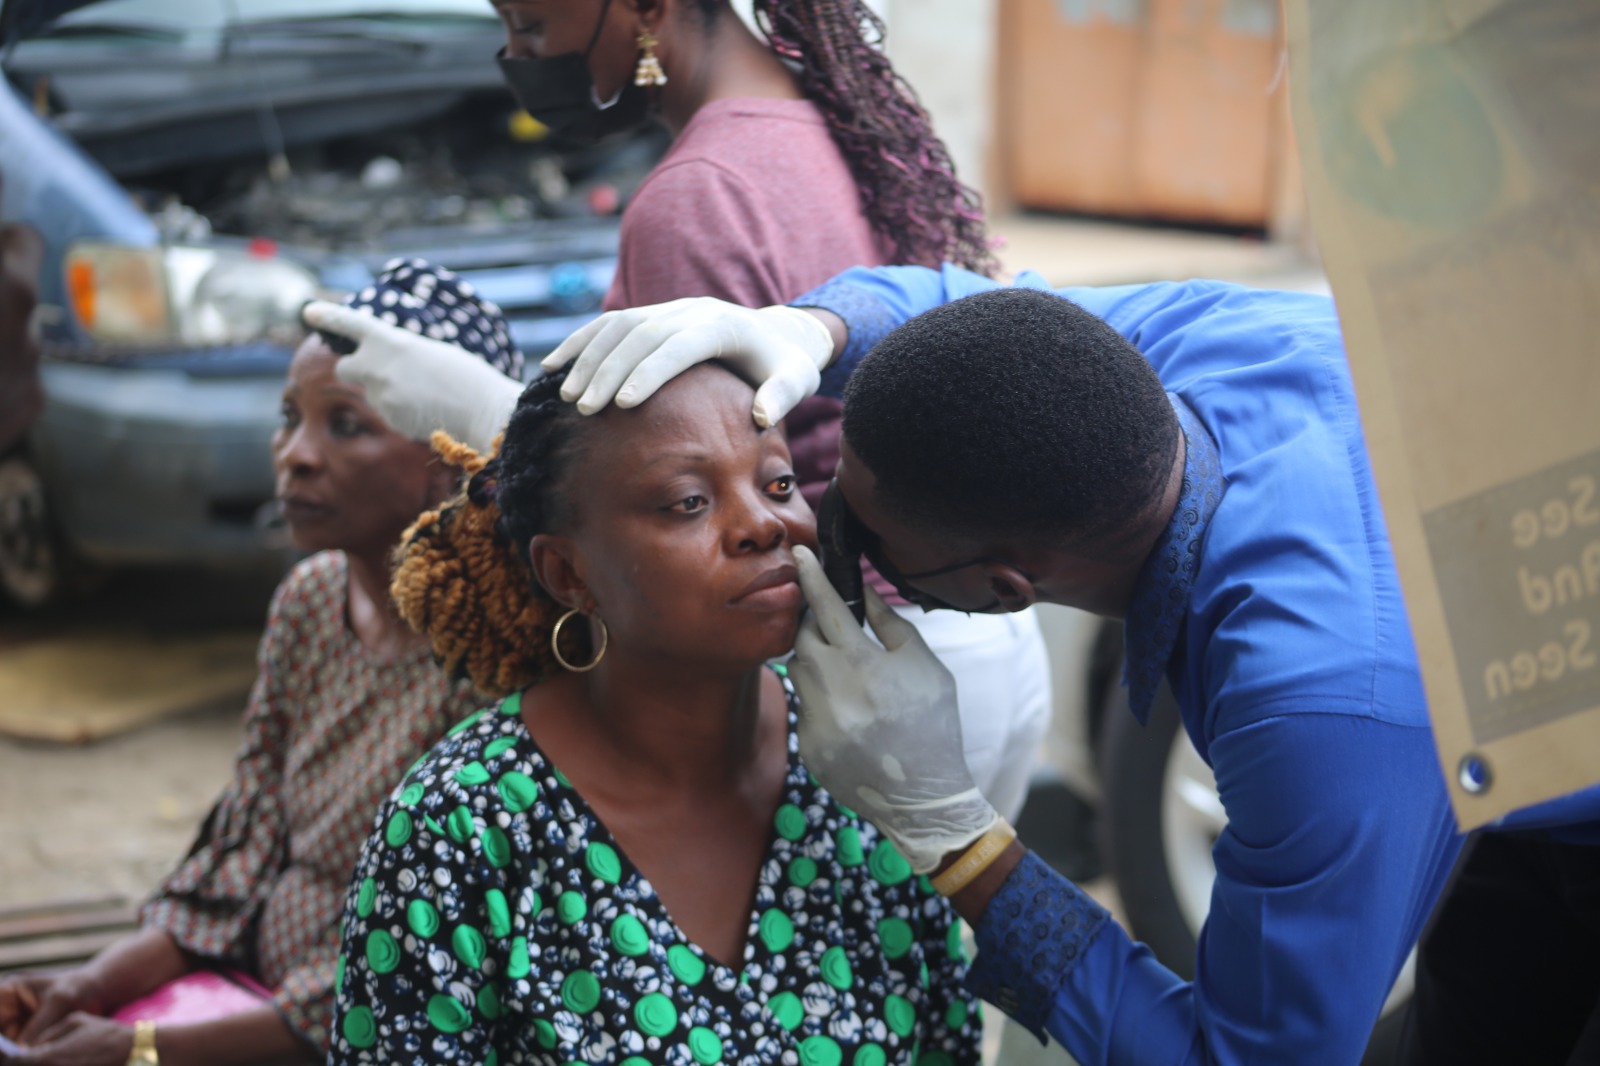 Volunteer Medical Corps Gifts Free Eye Care Services to Families in Alausa Community, Lagos, Nigeria